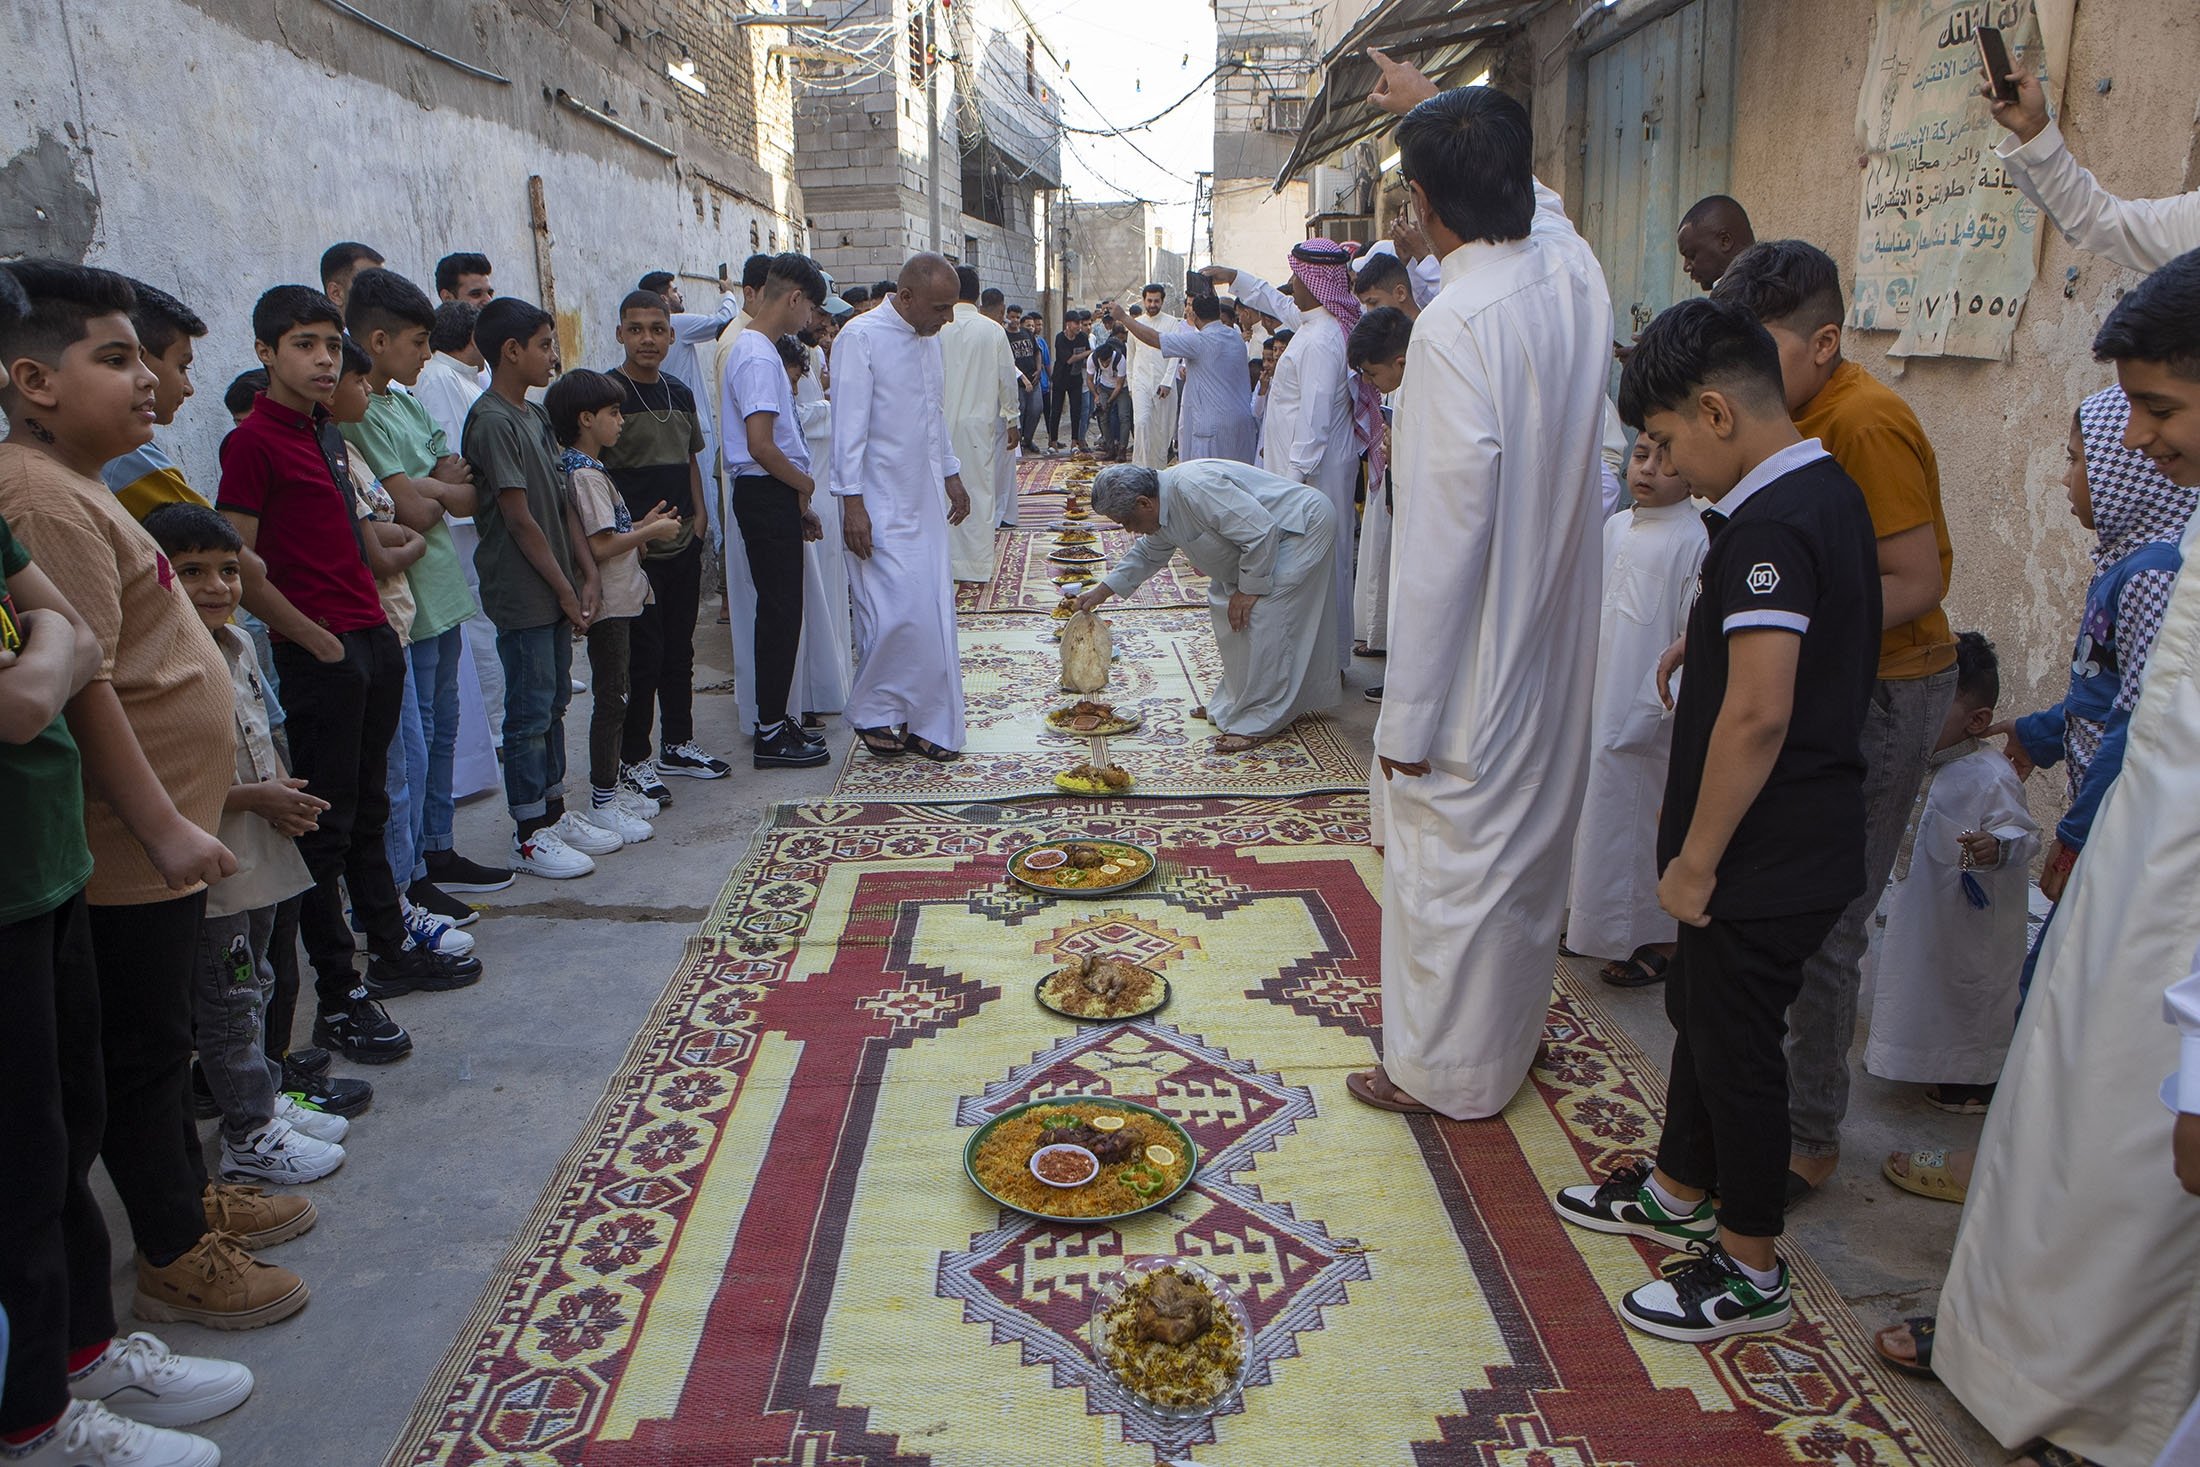 Iraqis eat morning breakfast on the first day of the Eid Al-Fitr holiday in Basra, Iraq, April 21, 2023. (AP Photo)